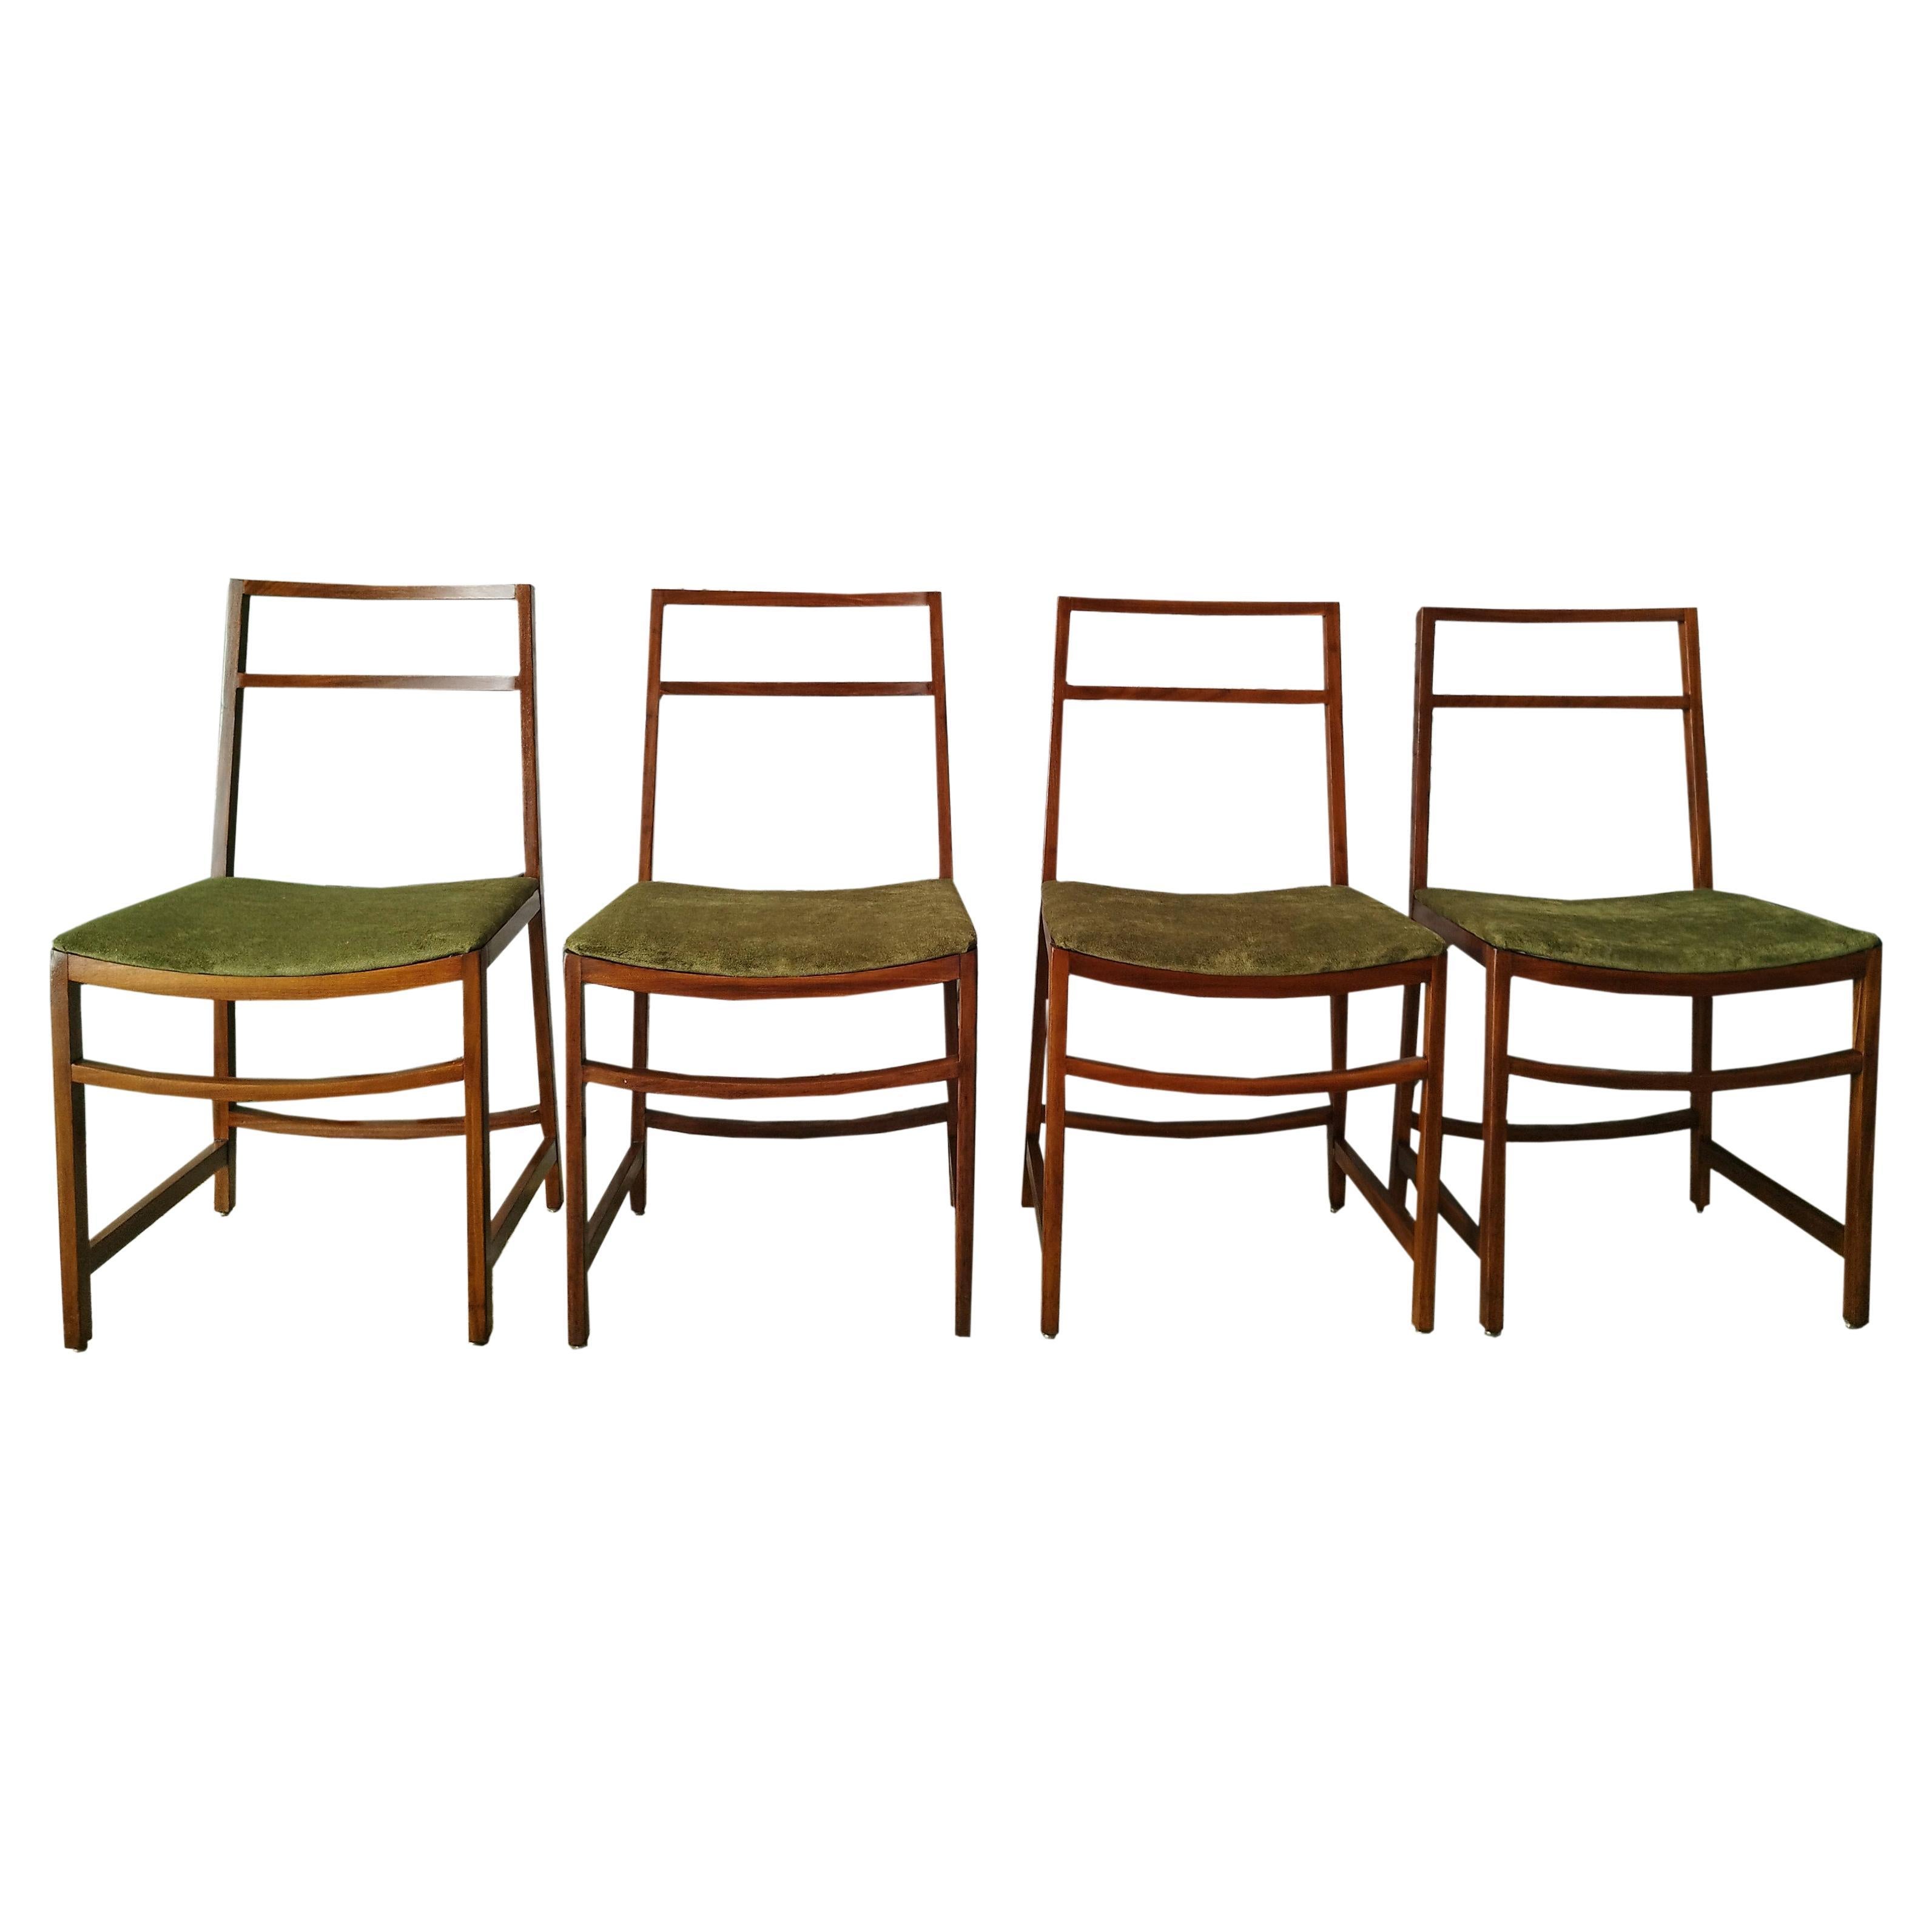 Renato Venturi for Mim Set of 4 Green Fabric and Wood Chairs, Italy 1960s